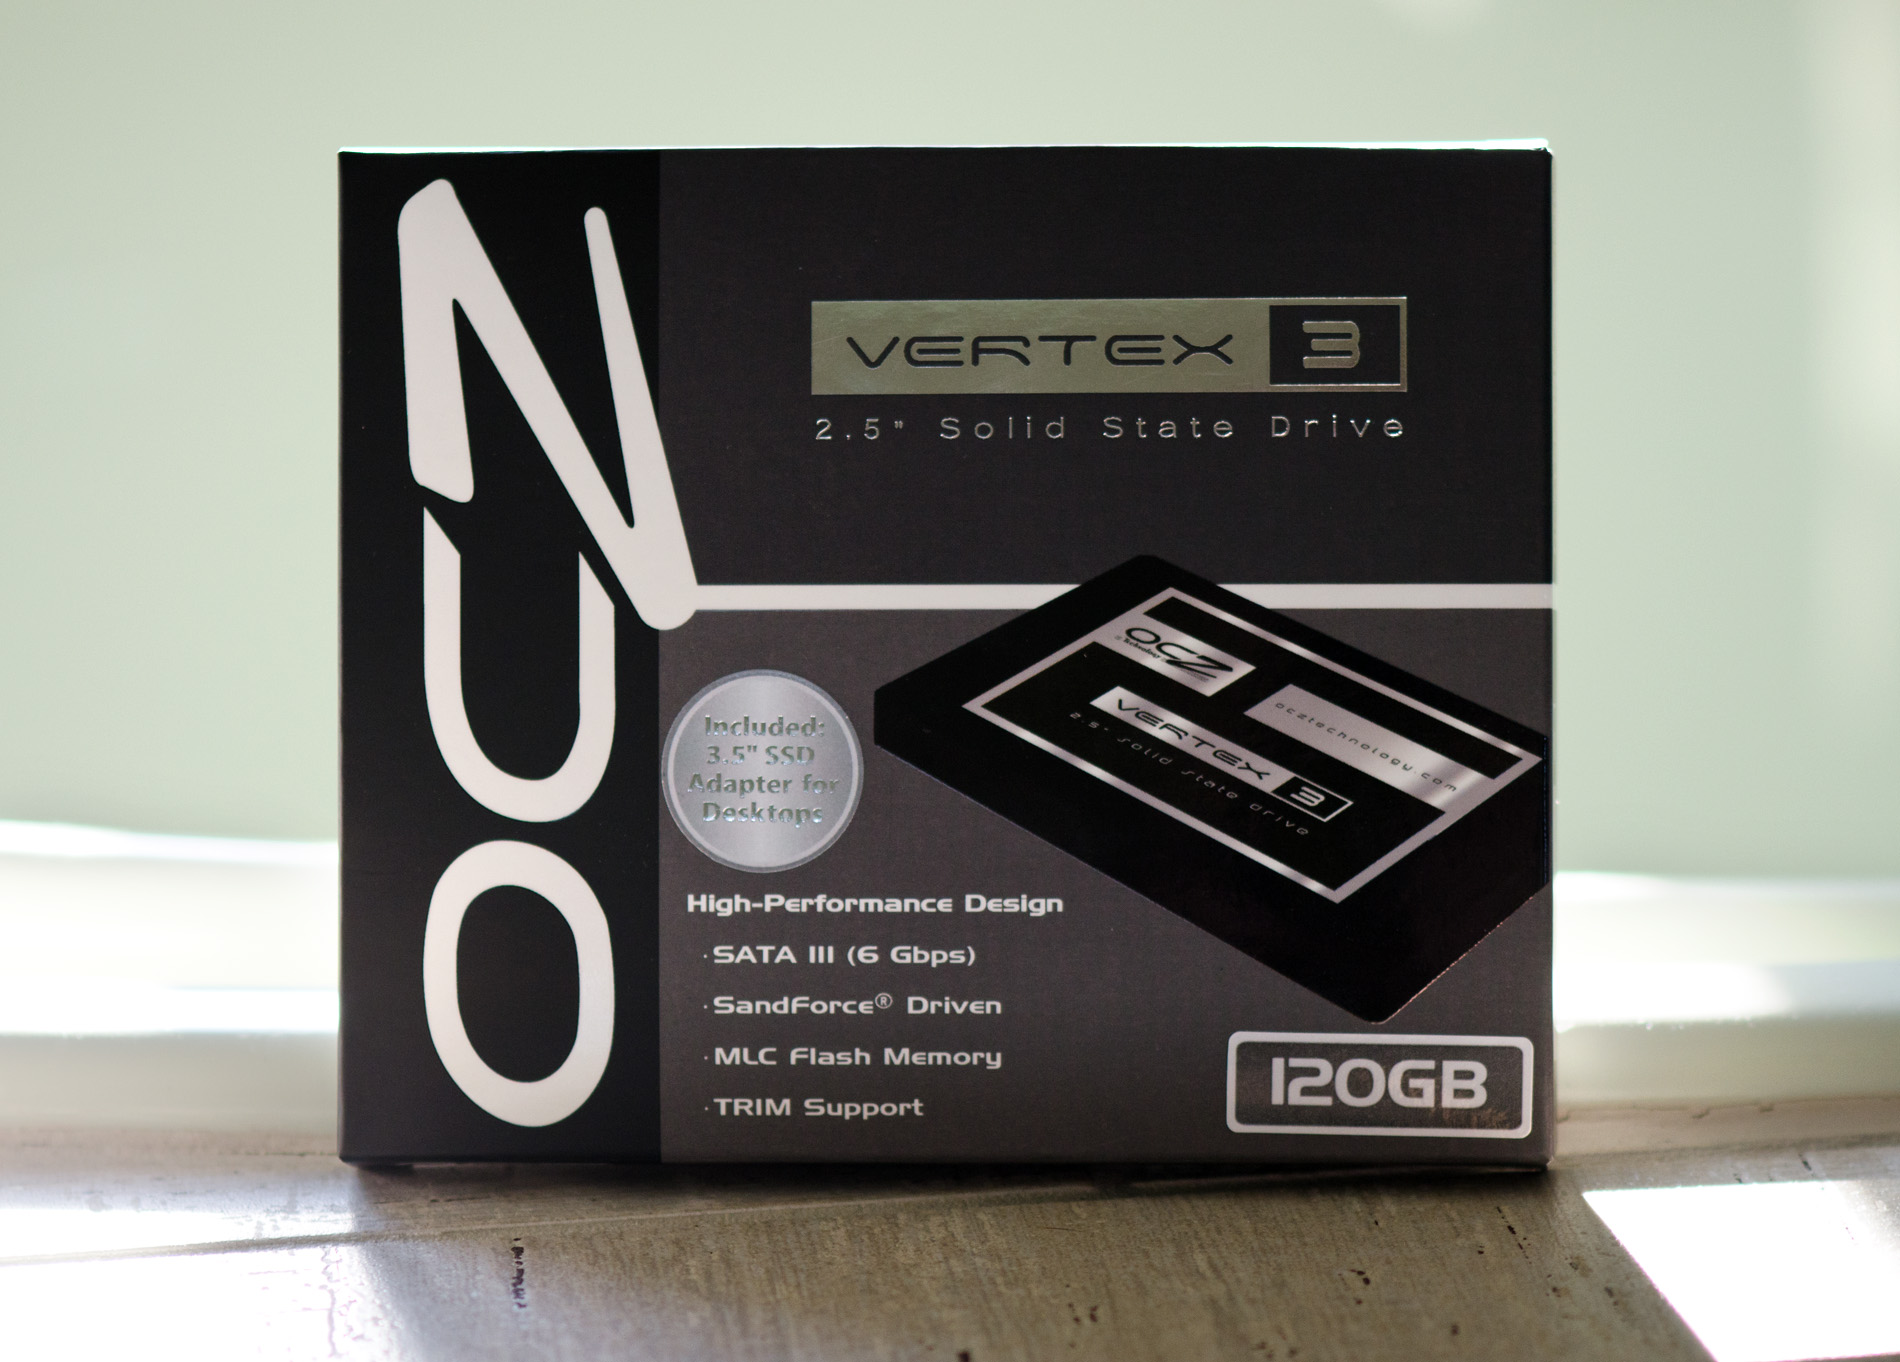 The Vertex 3 Review (120GB)